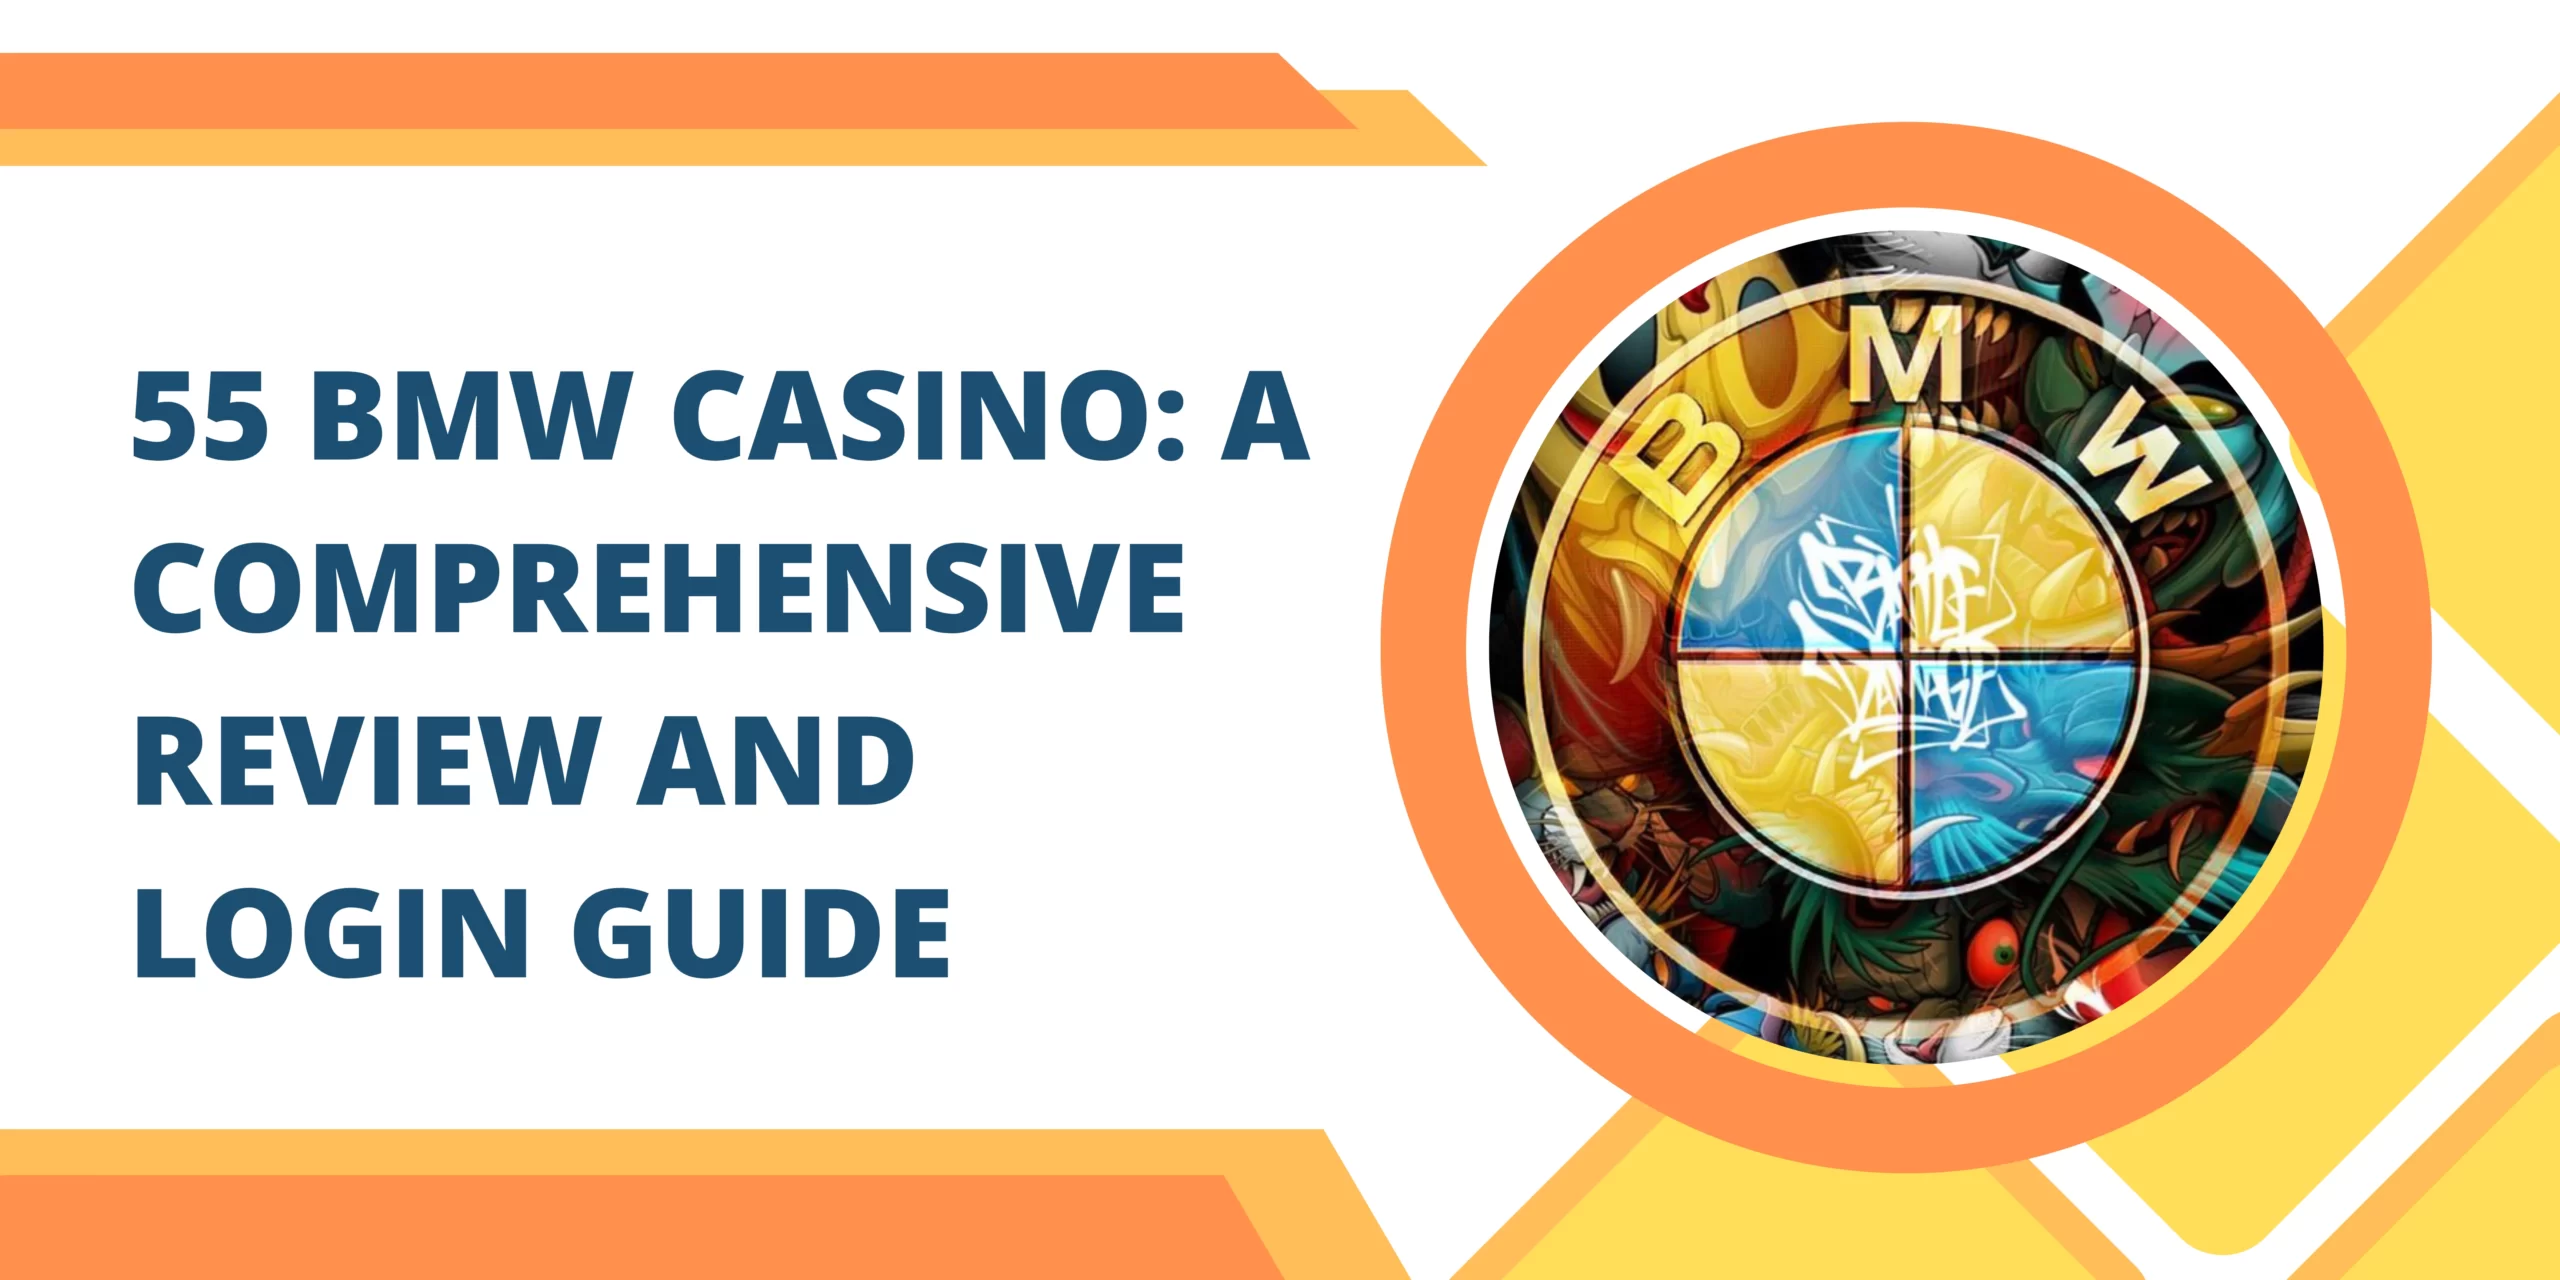 55 BMW Casino: A Comprehensive Review and Login Guide